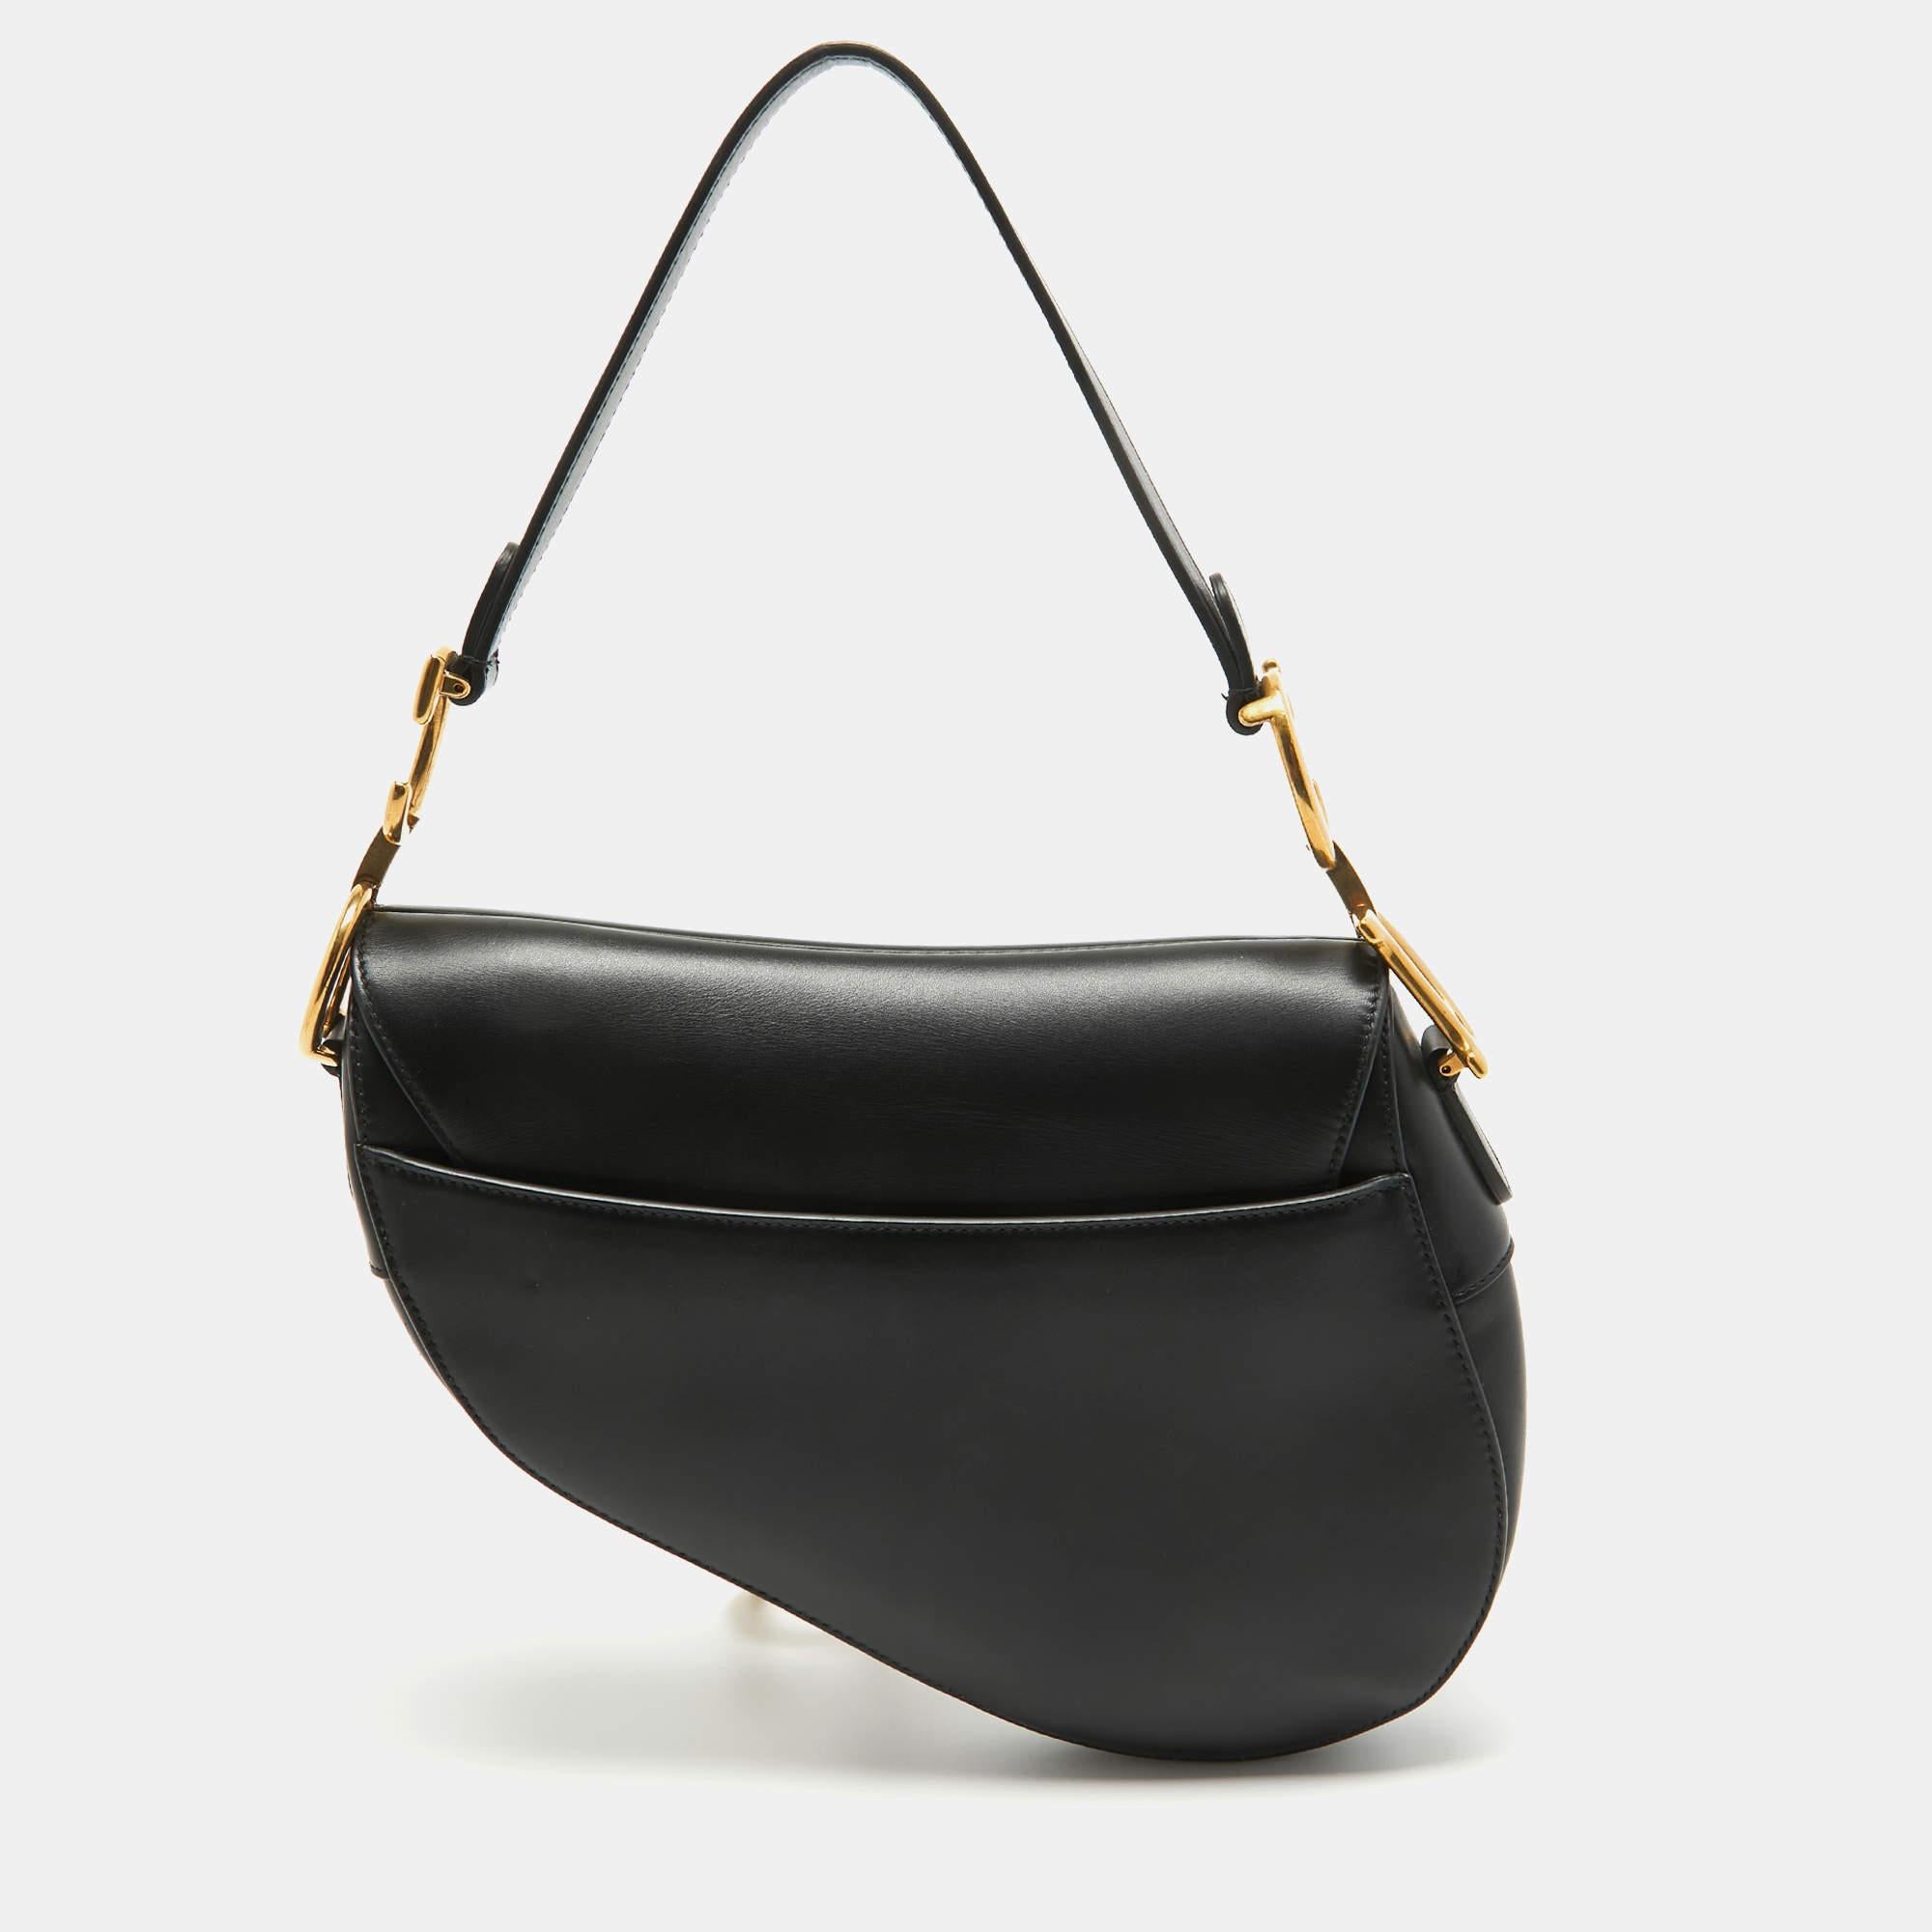 An example of timeless style and great design ideas, Dior's Saddle bag is sought after for all the right reasons. This Saddle bag for women is crafted using black leather in the iconic shape and it has gold-tone CD letters to hold the single handle